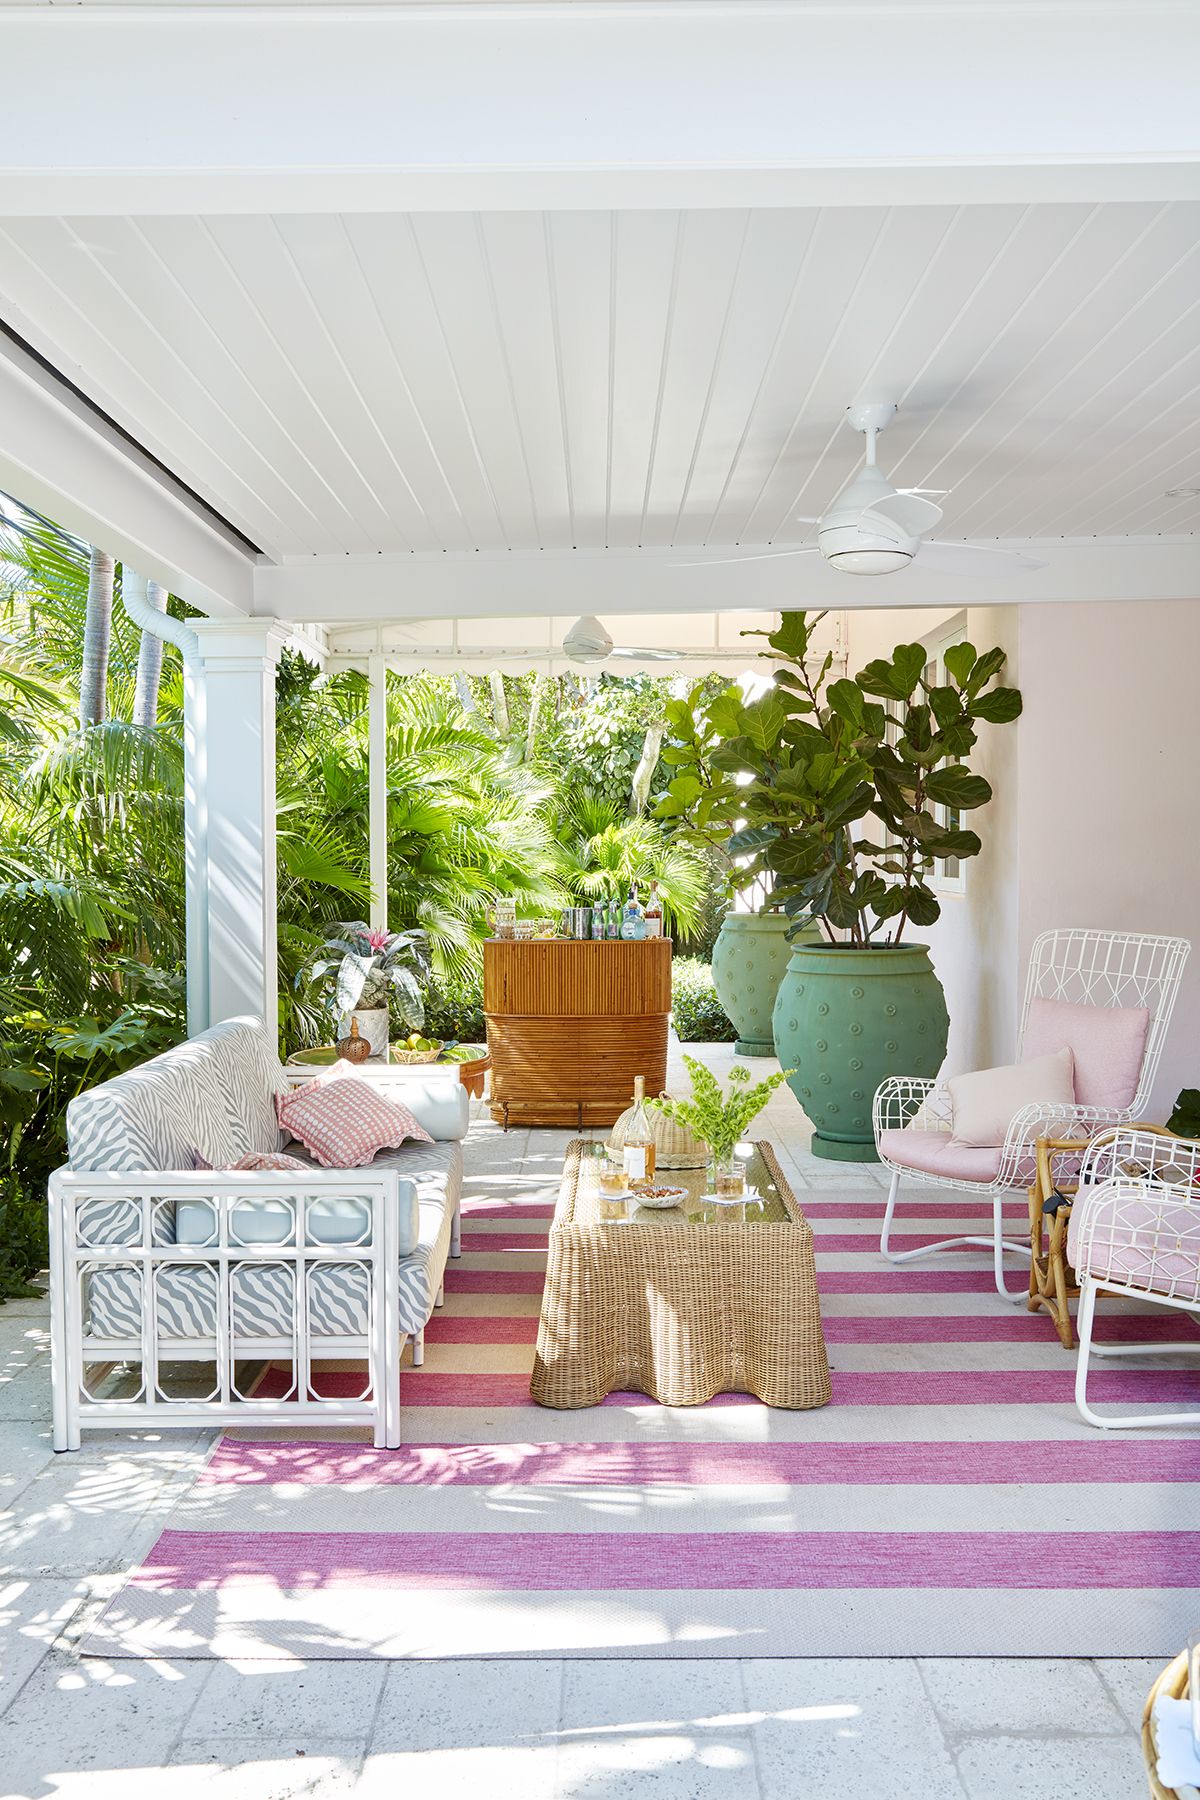 25 Best Patio Cover Ideas - Smart Ways To Cover Your Patio